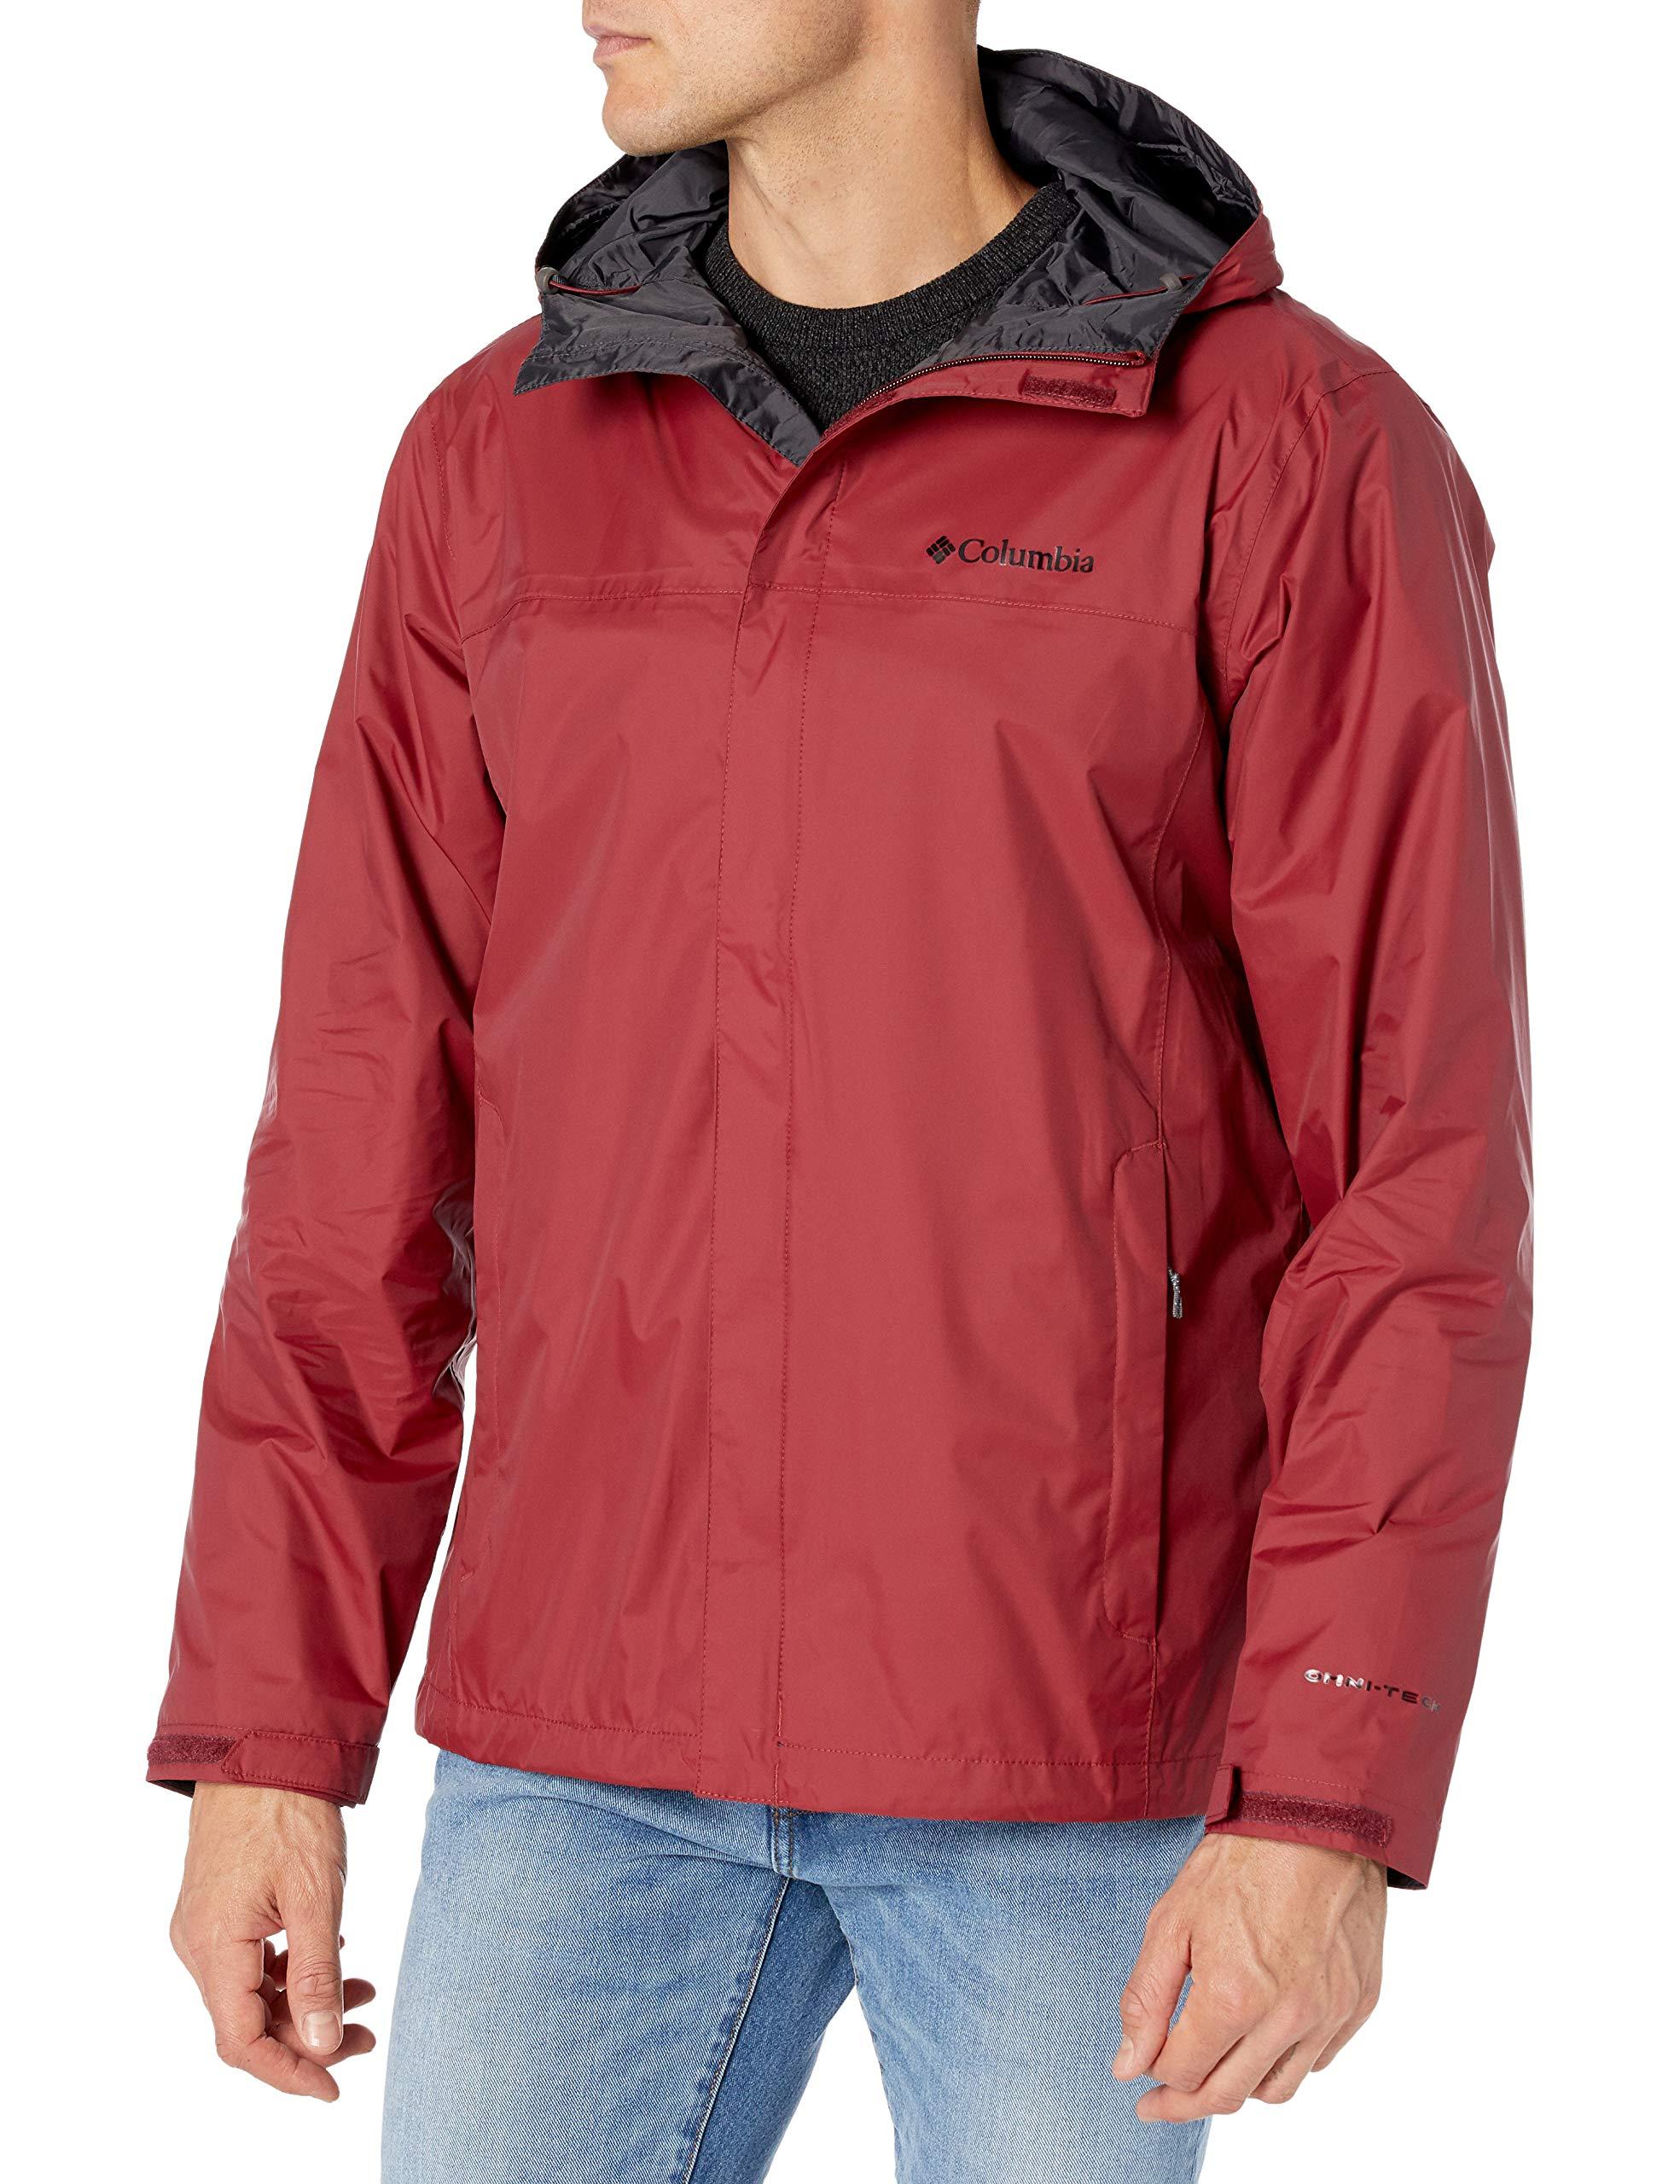 Columbia Synthetic Watertight Ii Rain Jacket in Red for Men - Save 41% ...